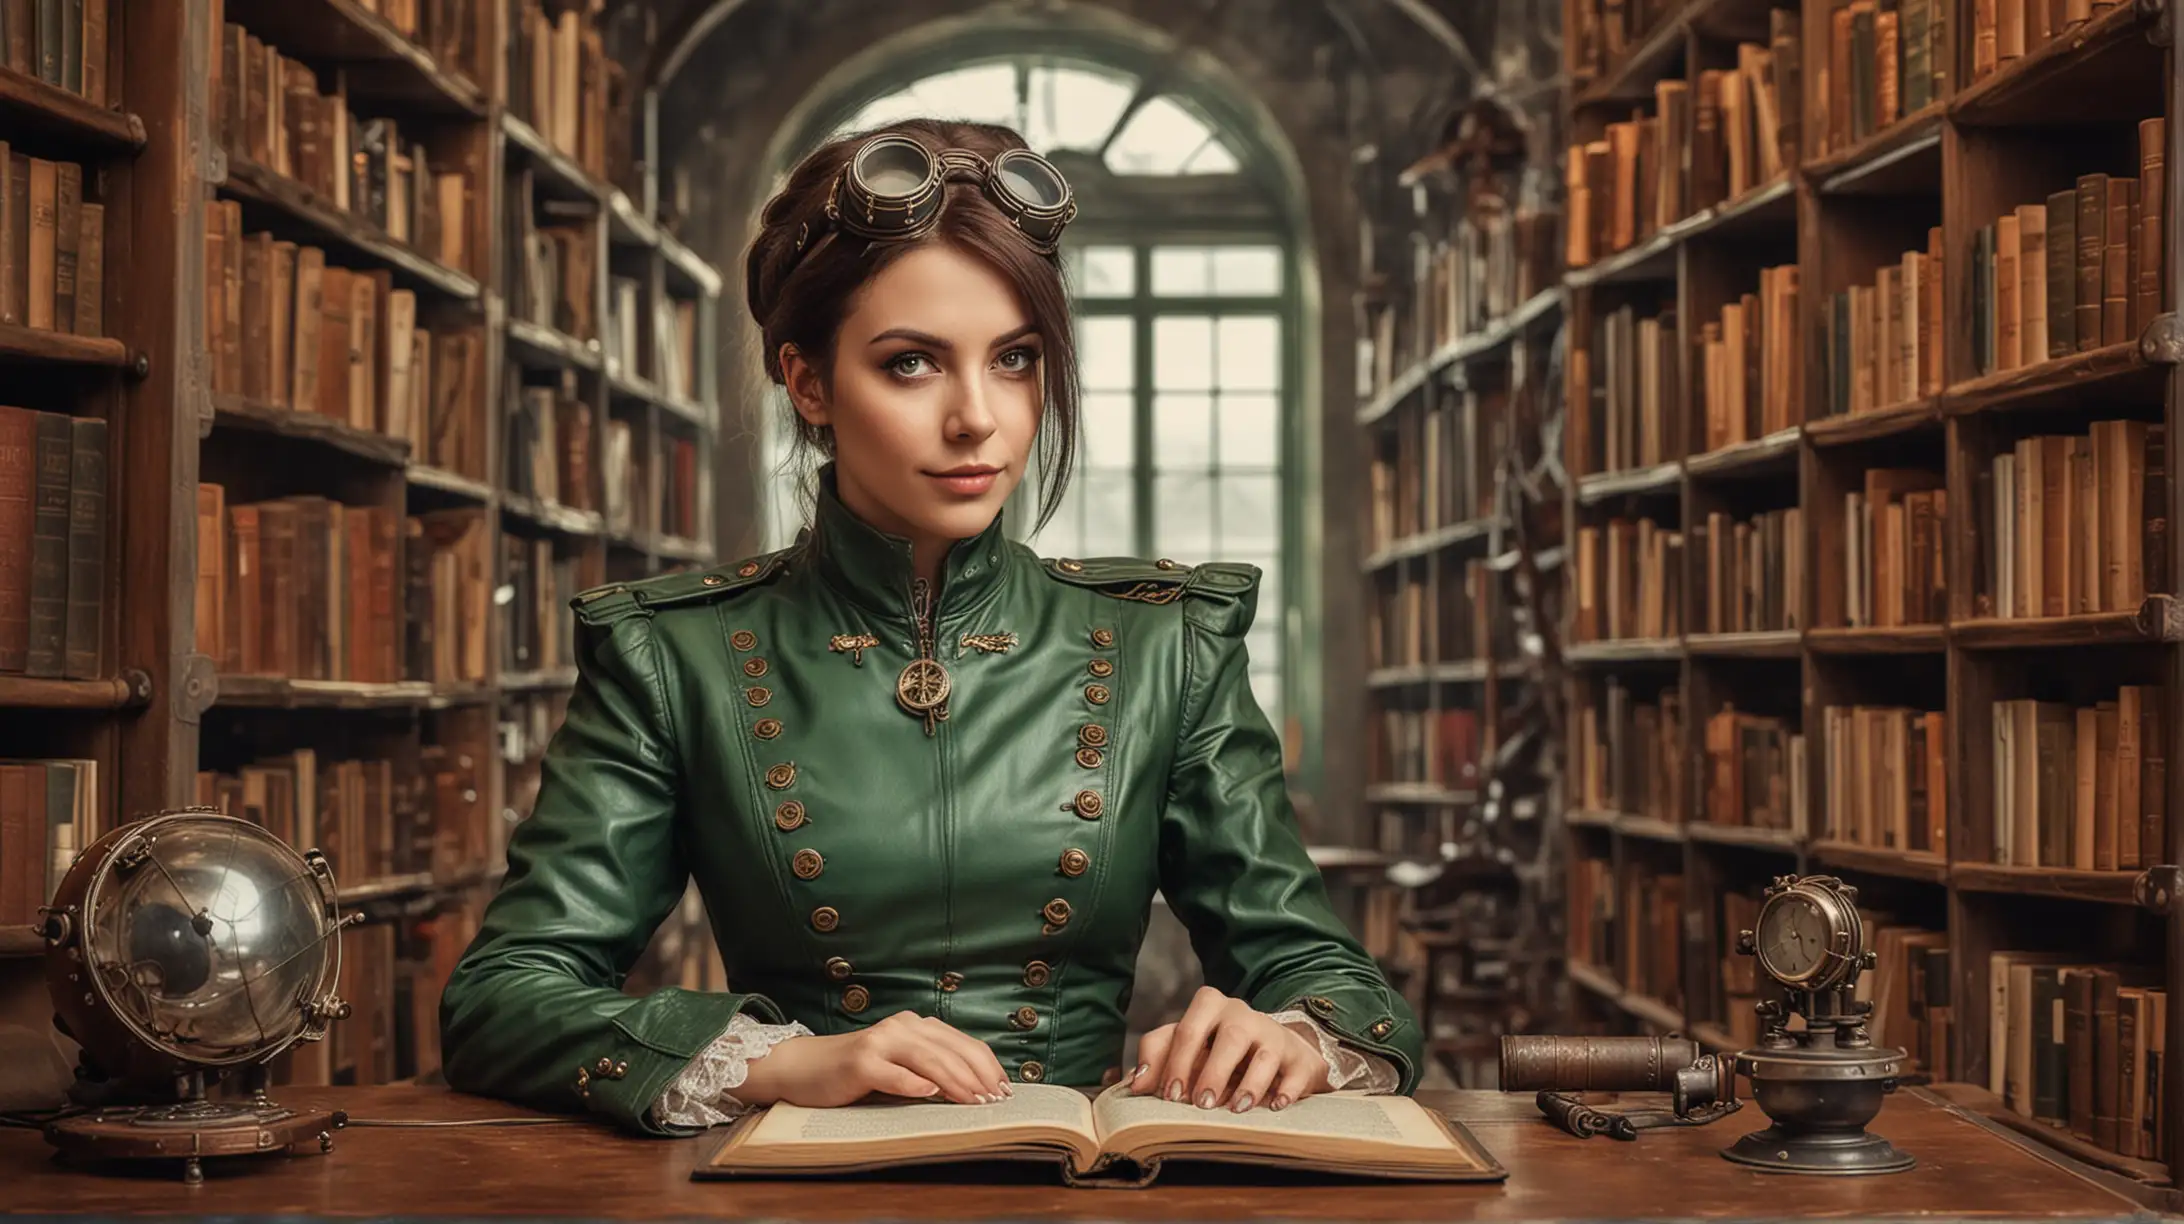 a steampunk woman in a leather green uniform sits at the table between bookshelves in a library and reads a thick book, the woman is very glad and happy